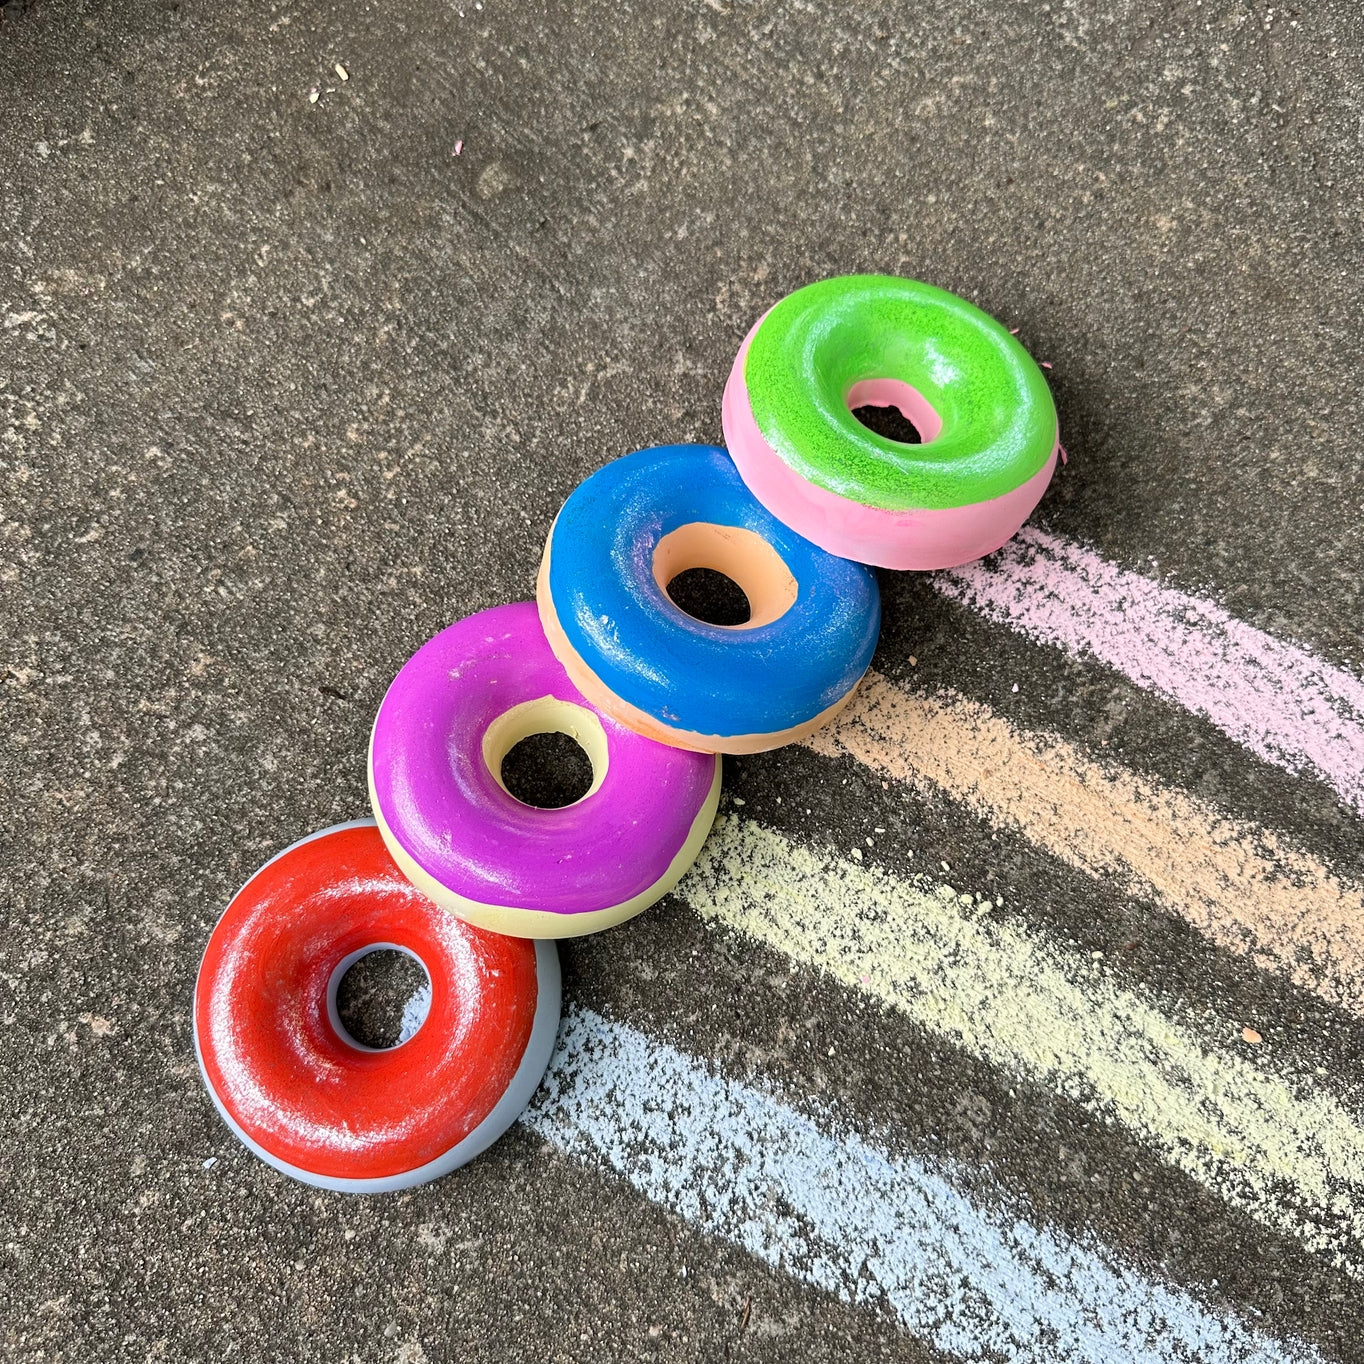 Grab one of these hand painted donuts for outdoor fun this season! With acrylic paint on top of vibrant colored chalk, you are sure to create something unique and special! Eco-friendly, non-toxic, washable.